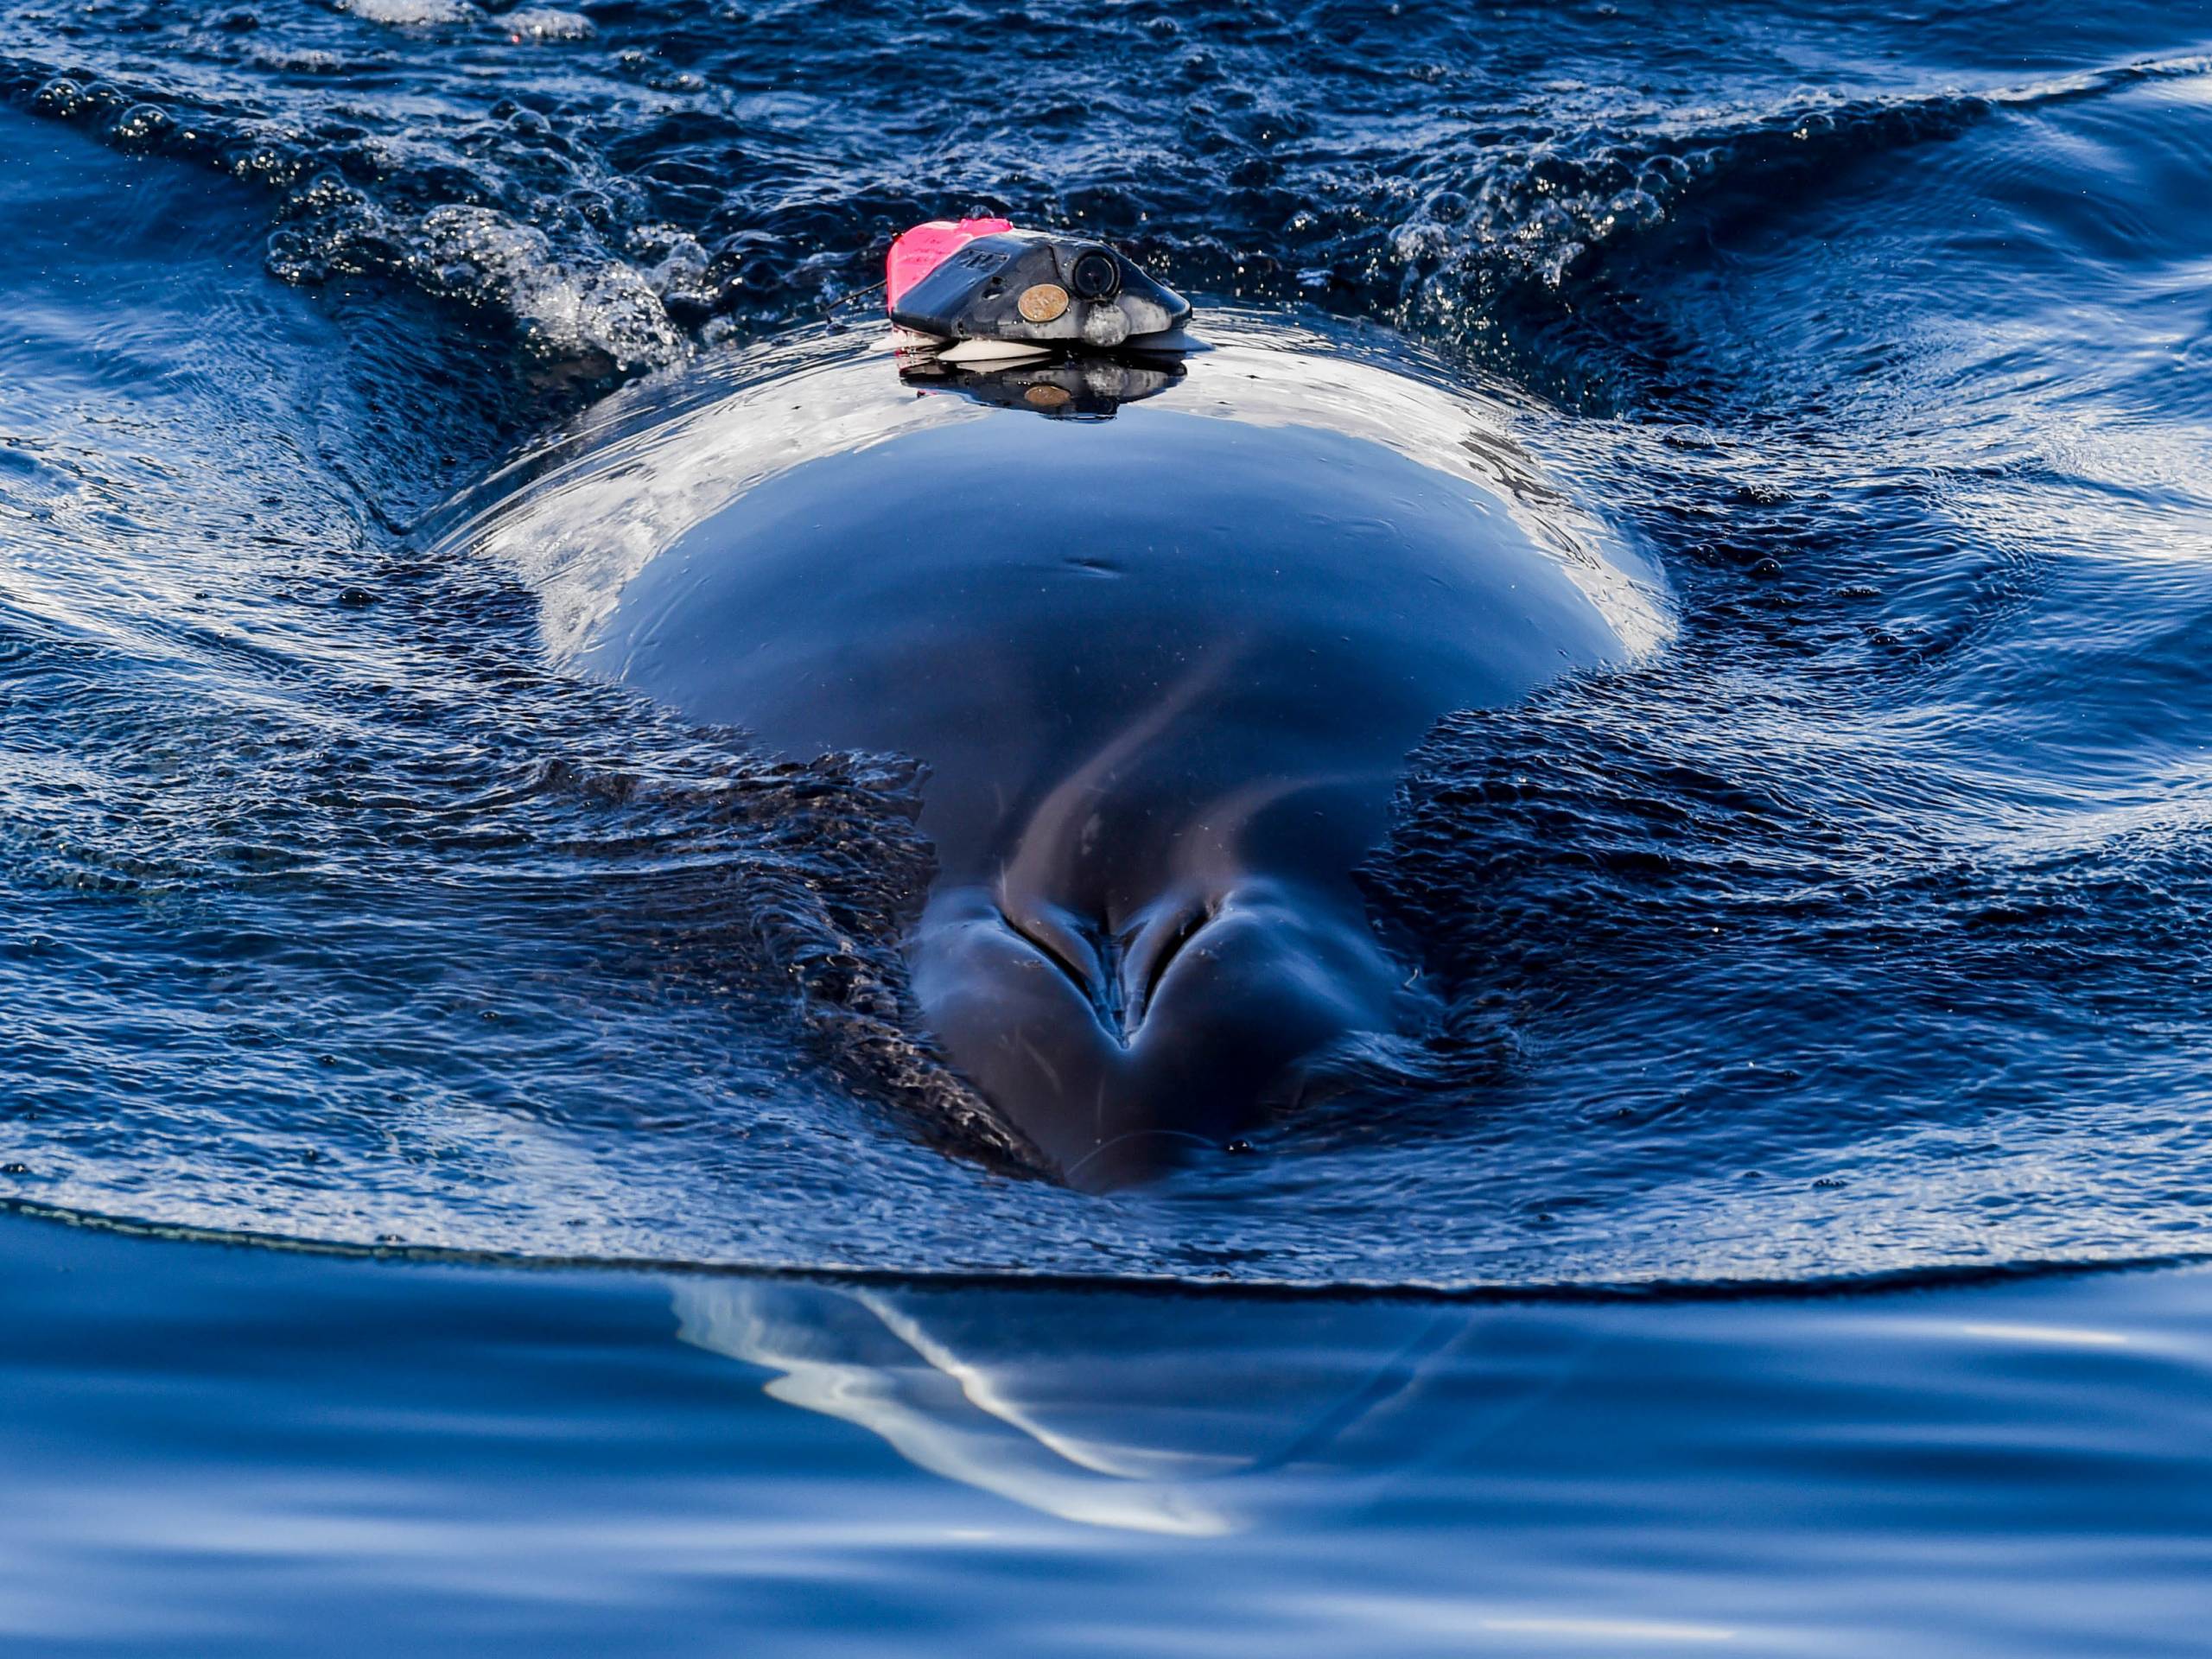 A dark whale with a red tracking tag glides through the surface of black water.